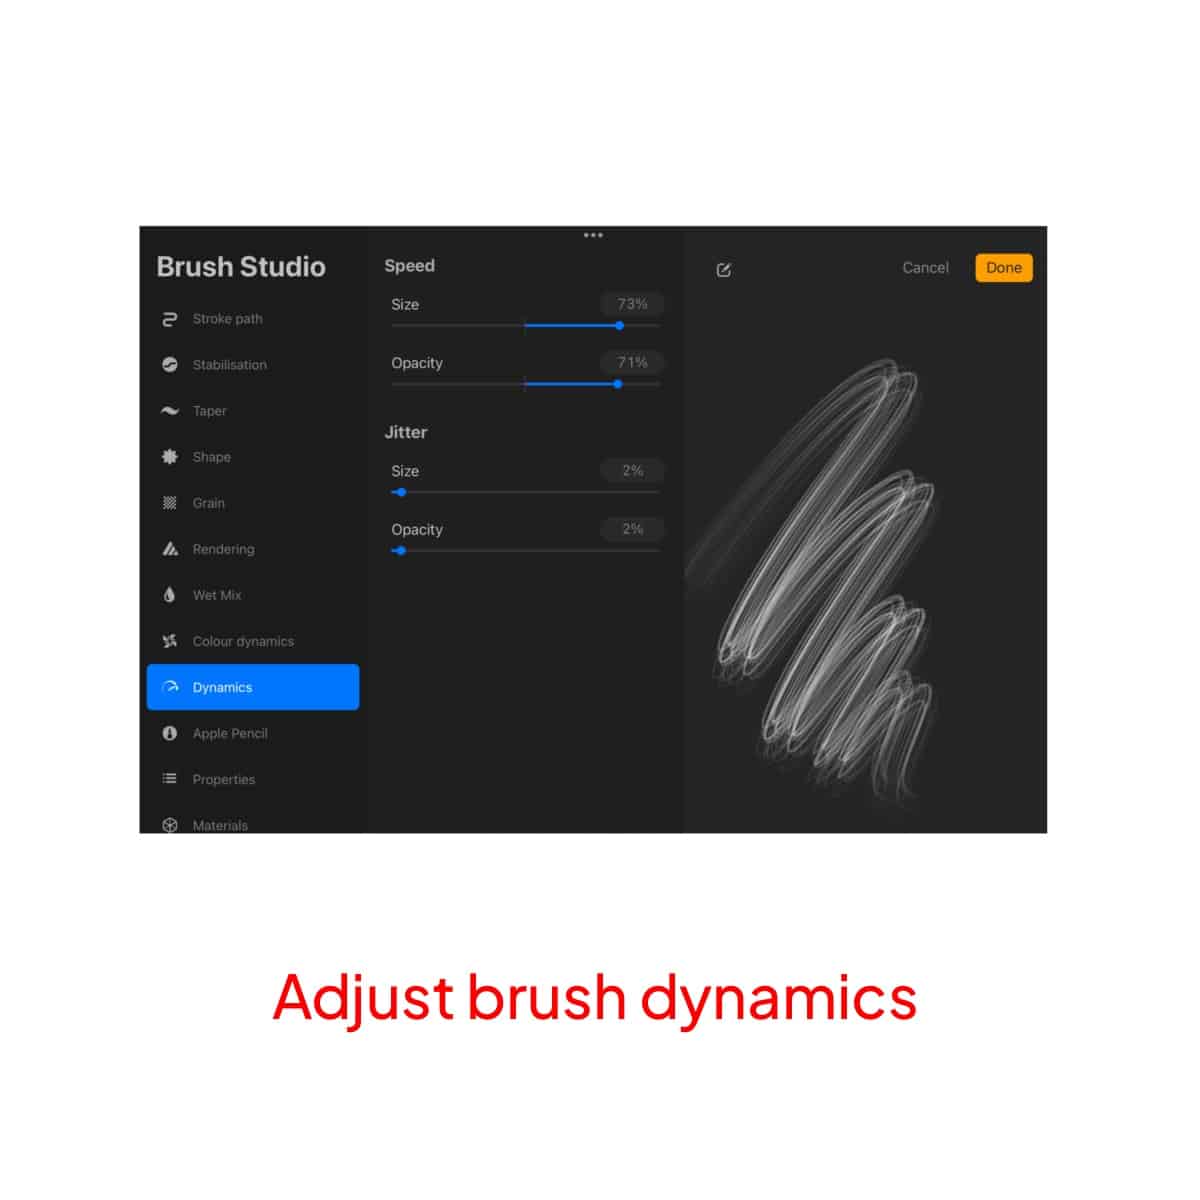 The "Brush Studio" Screen in Procreate, with the selected "Dynamics" option.